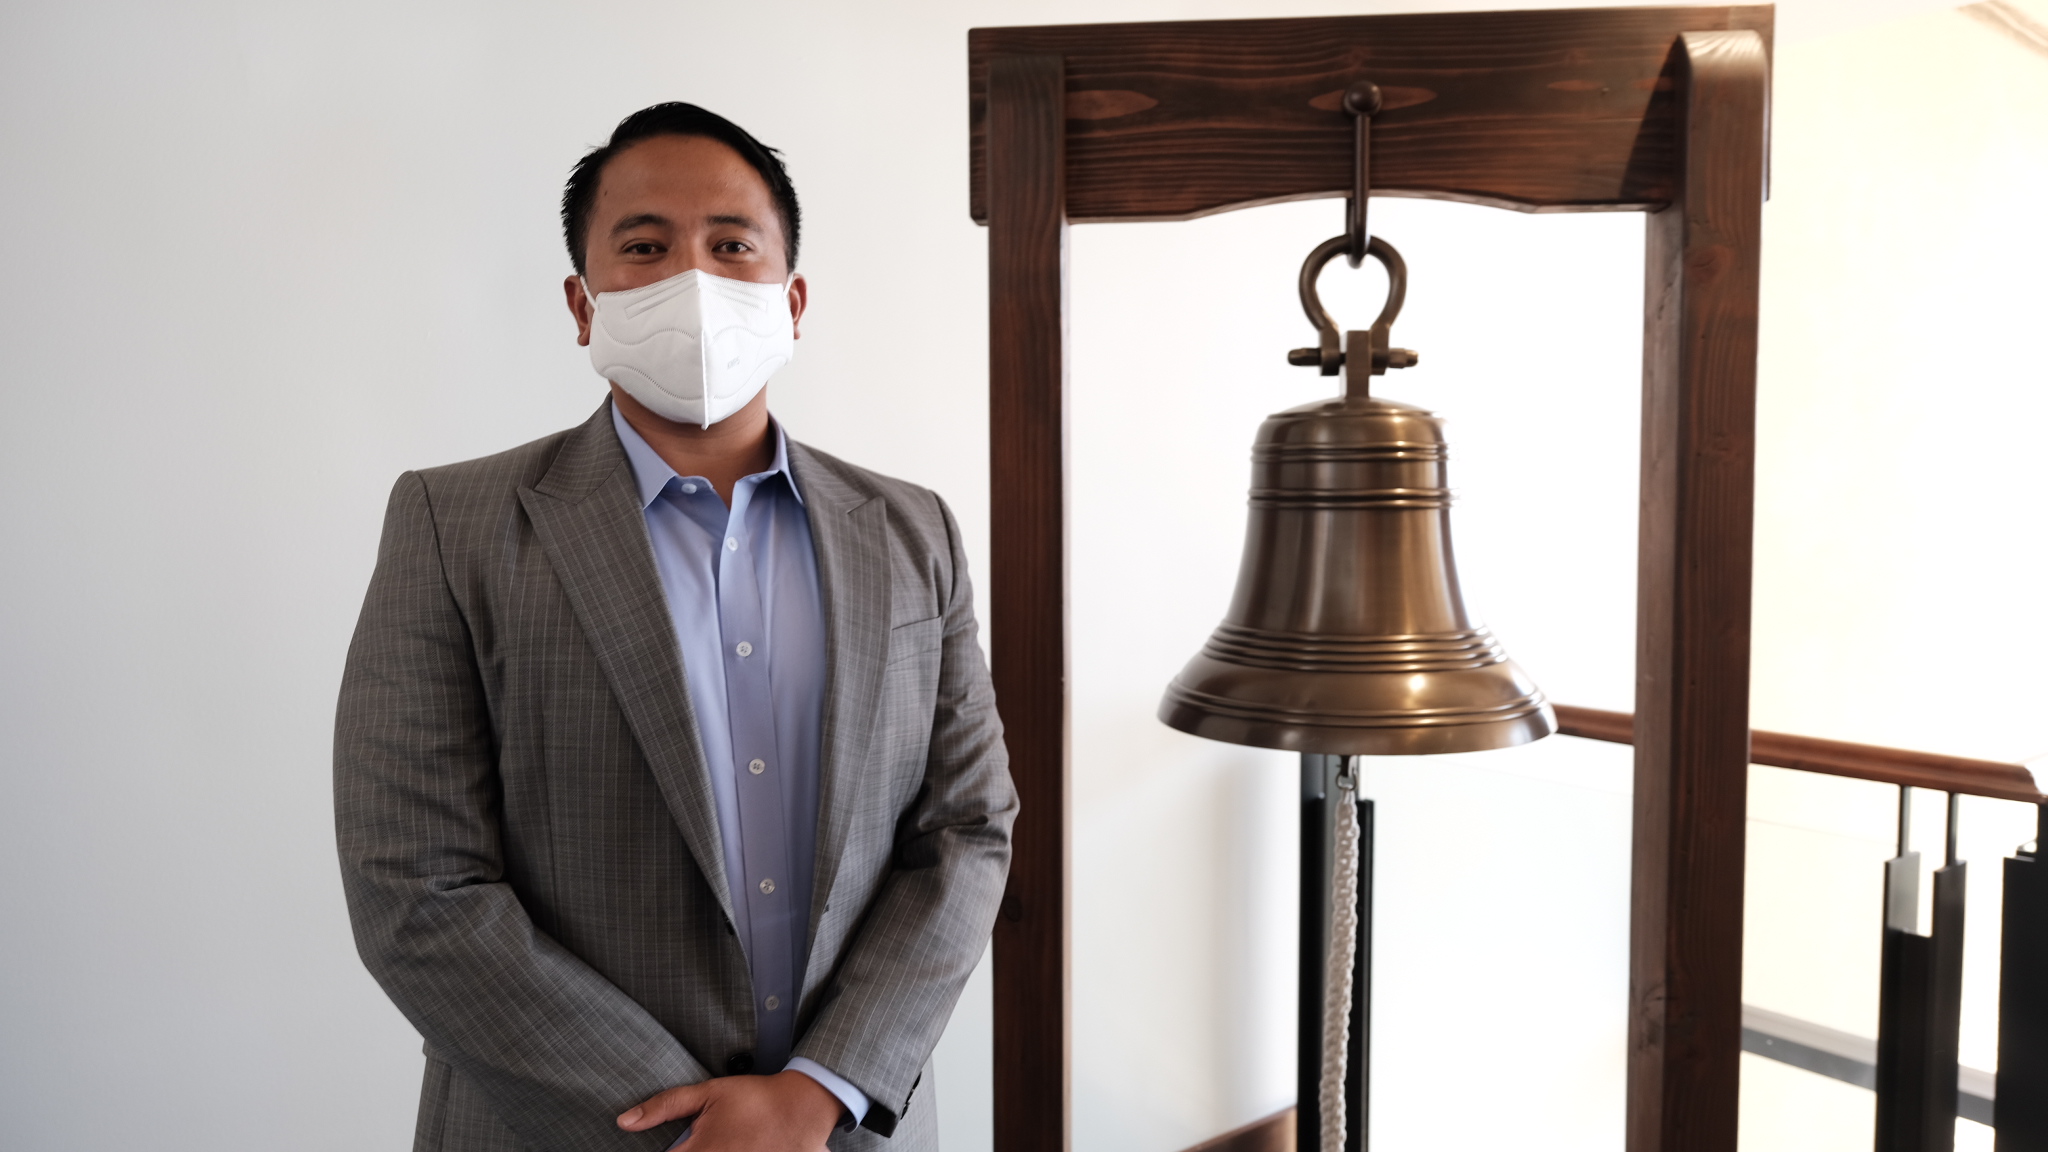 Joseph Castro stands next to the jobs bell